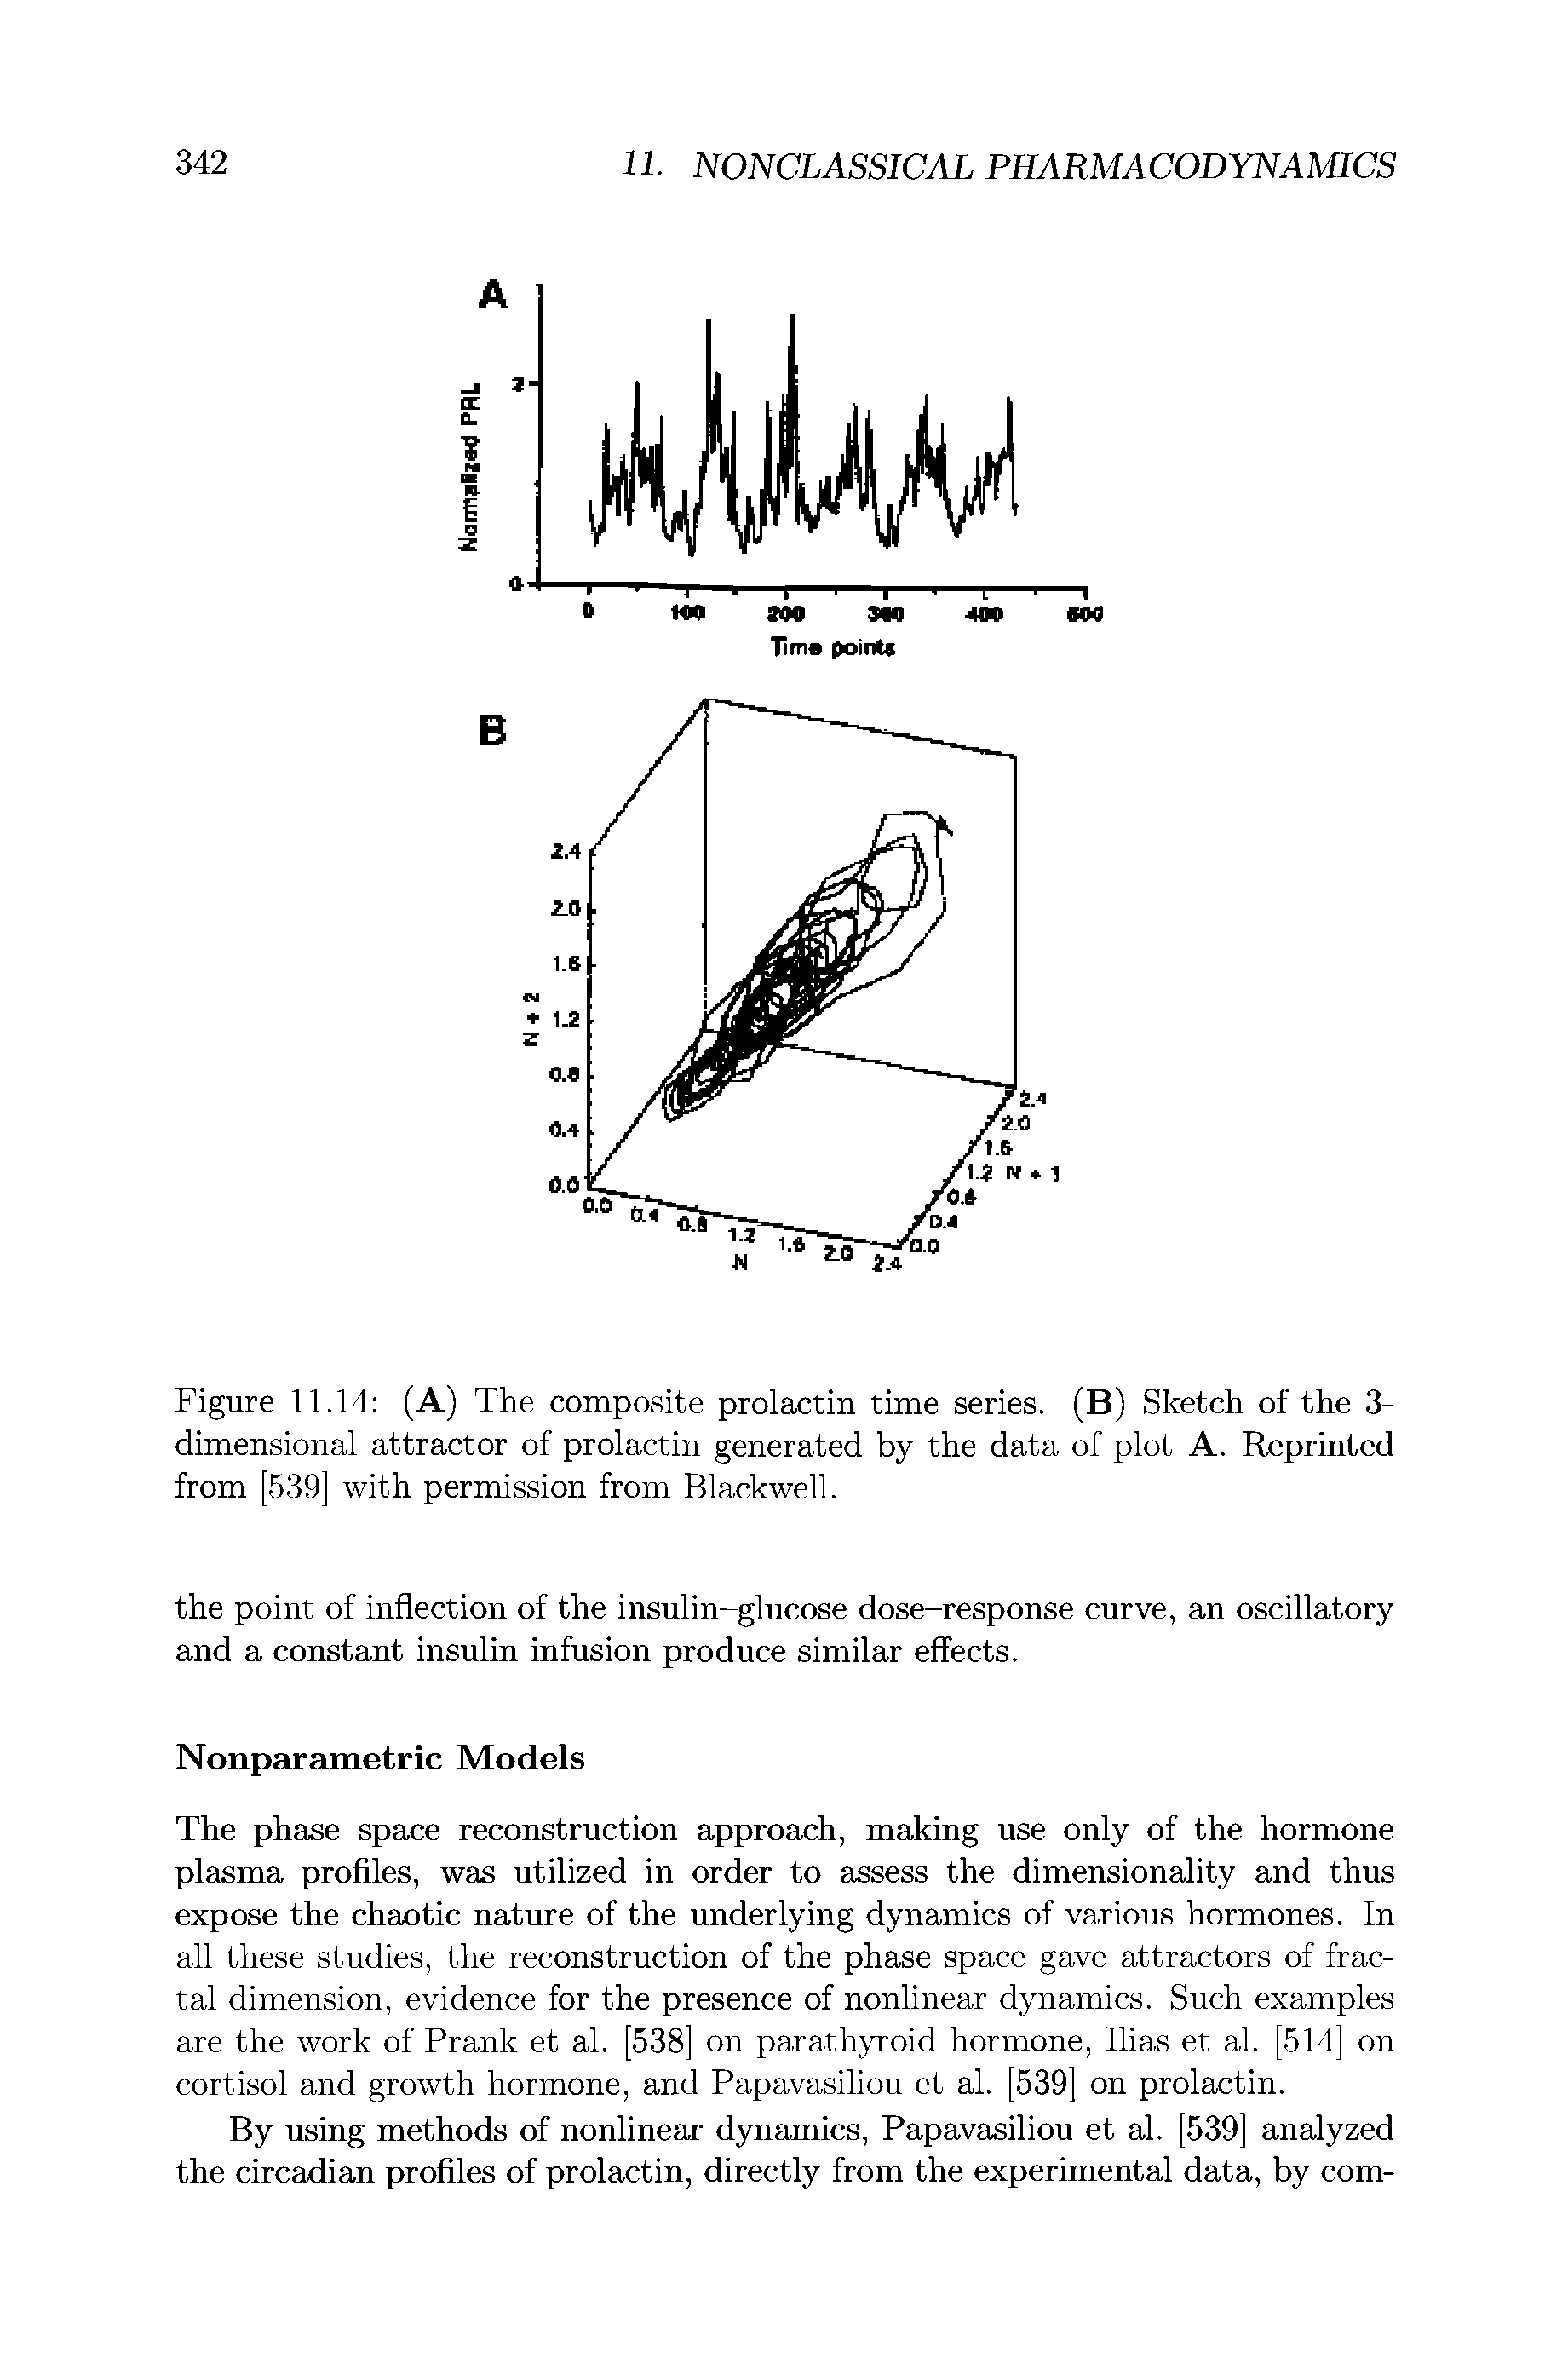 Figure 11.14 (A) The composite prolactin time series. (B) Sketch of the 3-dimensional attractor of prolactin generated by the data of plot A. Reprinted from [539] with permission from Blackwell.